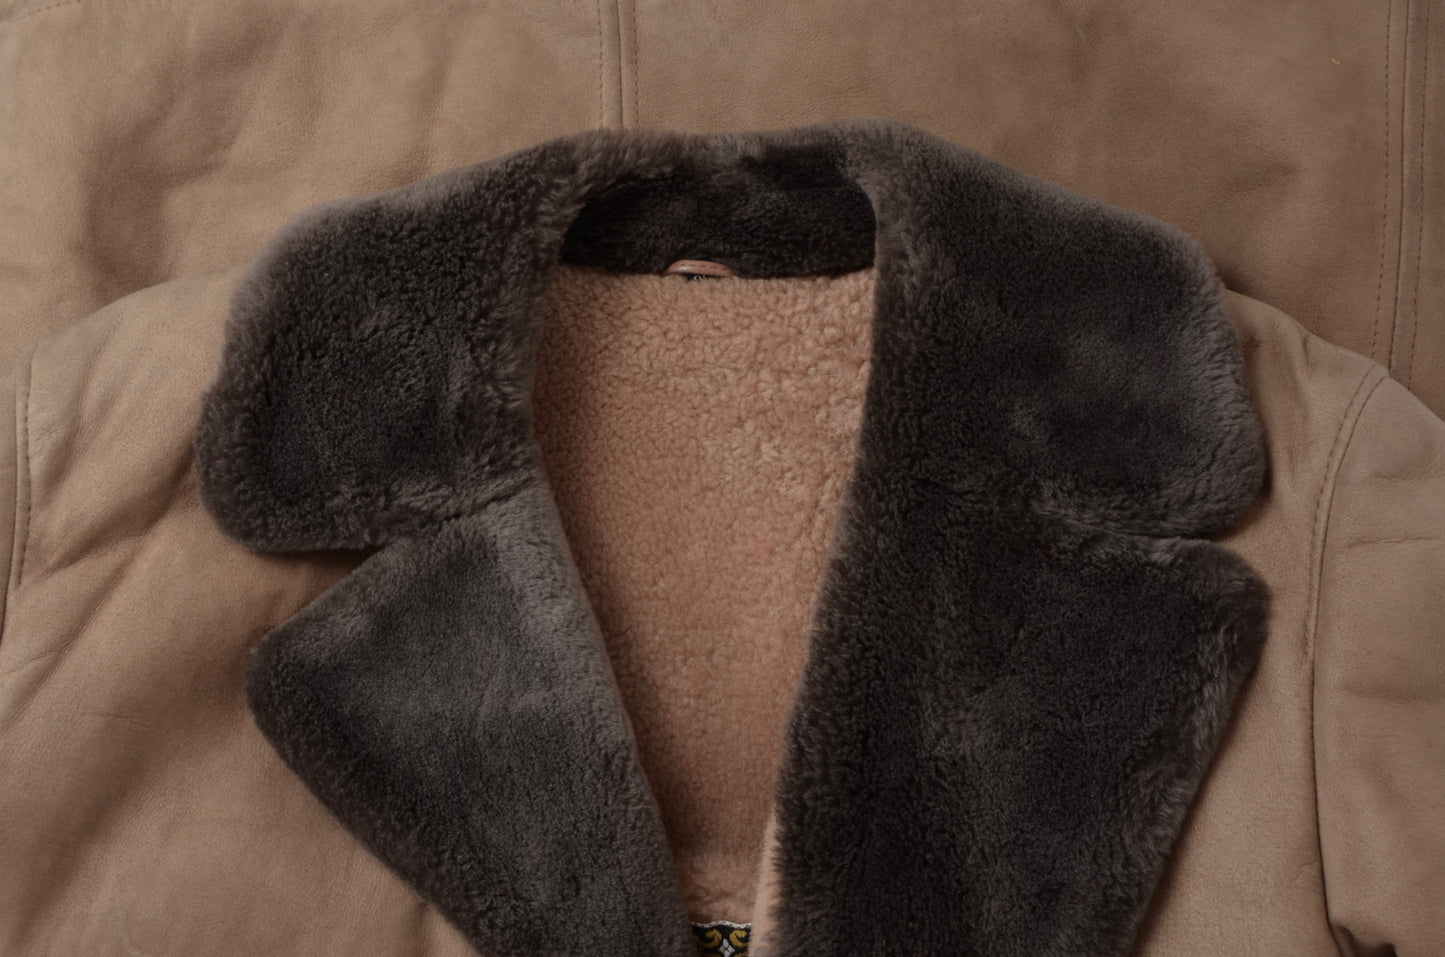 Shearling Coat Size 56 - Brown-Taupe